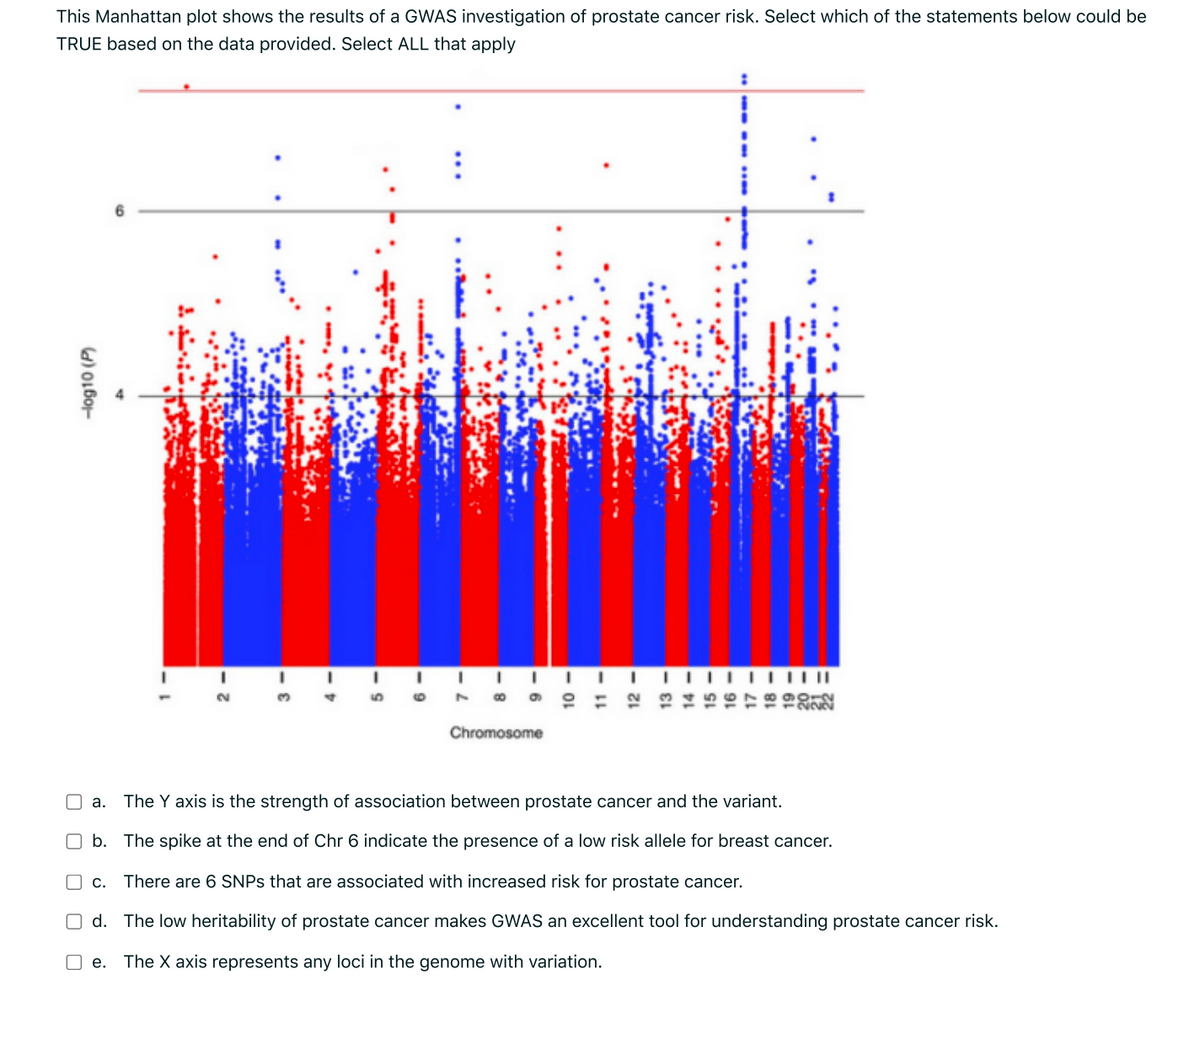 This Manhattan plot shows the results of a GWAS investigation of prostate cancer risk. Select which of the statements below could be
TRUE based on the data provided. Select ALL that apply
4,
Chromosome
а.
The Y axis is the strength of association between prostate cancer and the variant.
b. The spike at the end of Chr 6 indicate the presence of a low risk allele for breast cancer.
O c.
There are 6 SNPS that are associated with increased risk for prostate cancer.
O d. The low heritability of prostate cancer makes GWAS an excellent tool for understanding prostate cancer risk.
O e.
The X axis represents any loci in the genome with variation.
-Hog10 (P)
